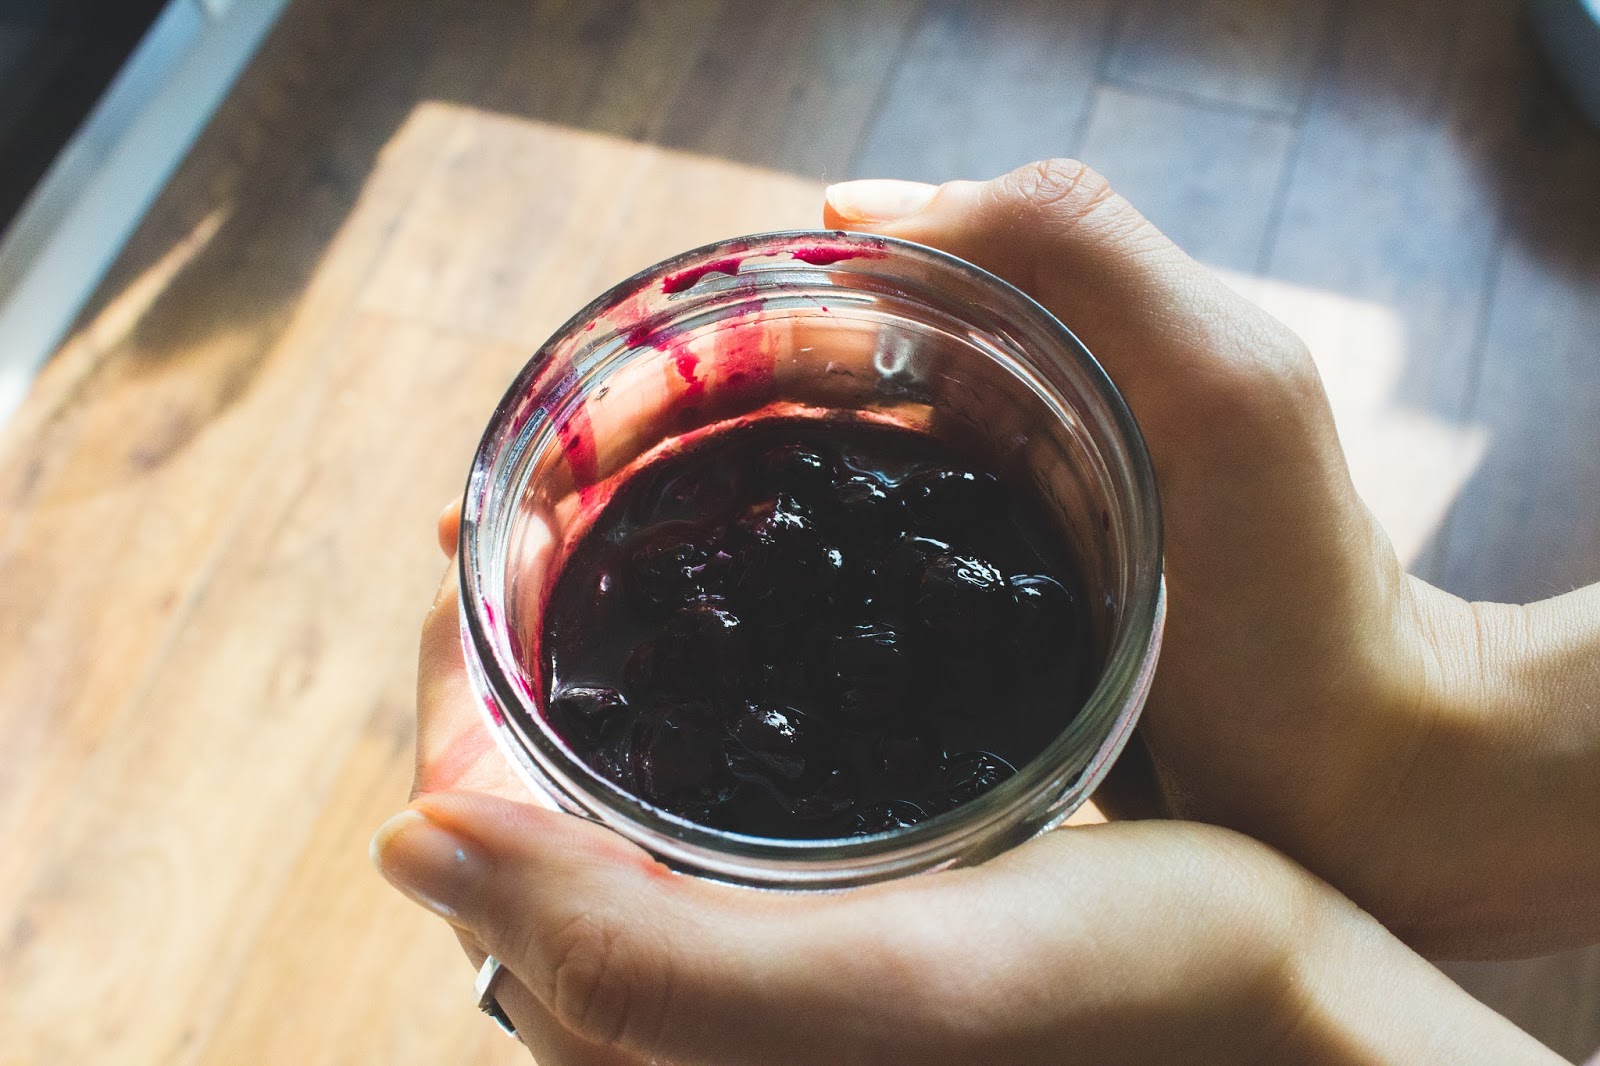 blueberry compote